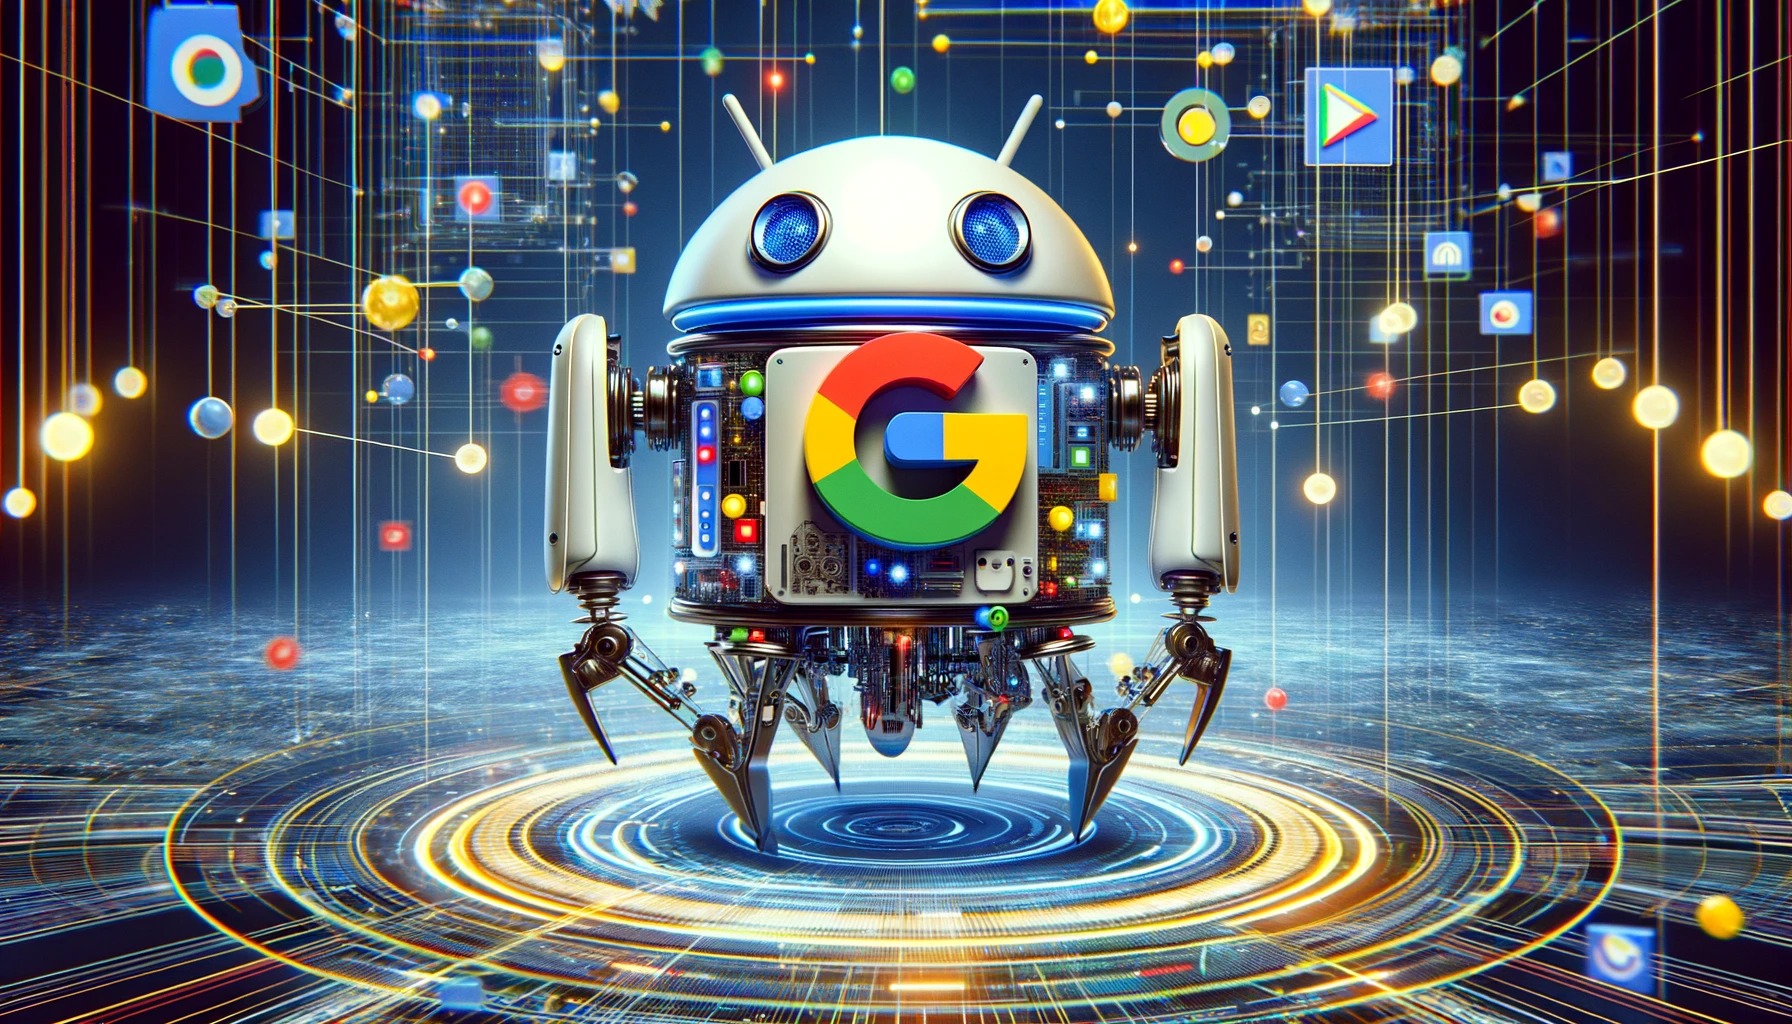 Googlebot crawl rate tool is now gone